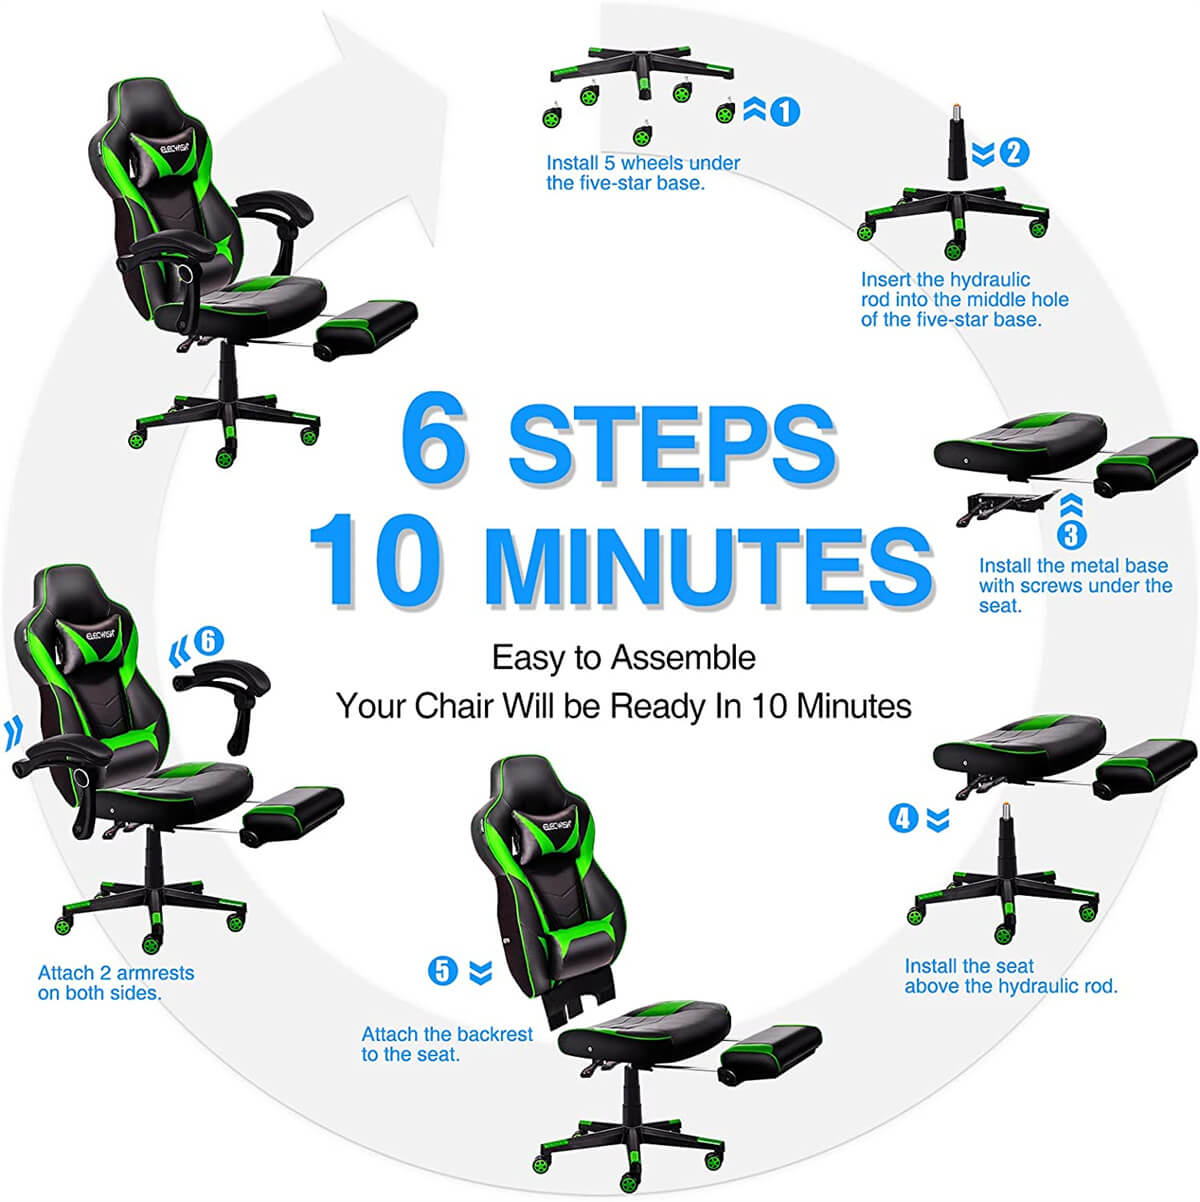 Elecwish Video Game Chairs Green Gaming Chair With Footrest OC087 is easy to assemble